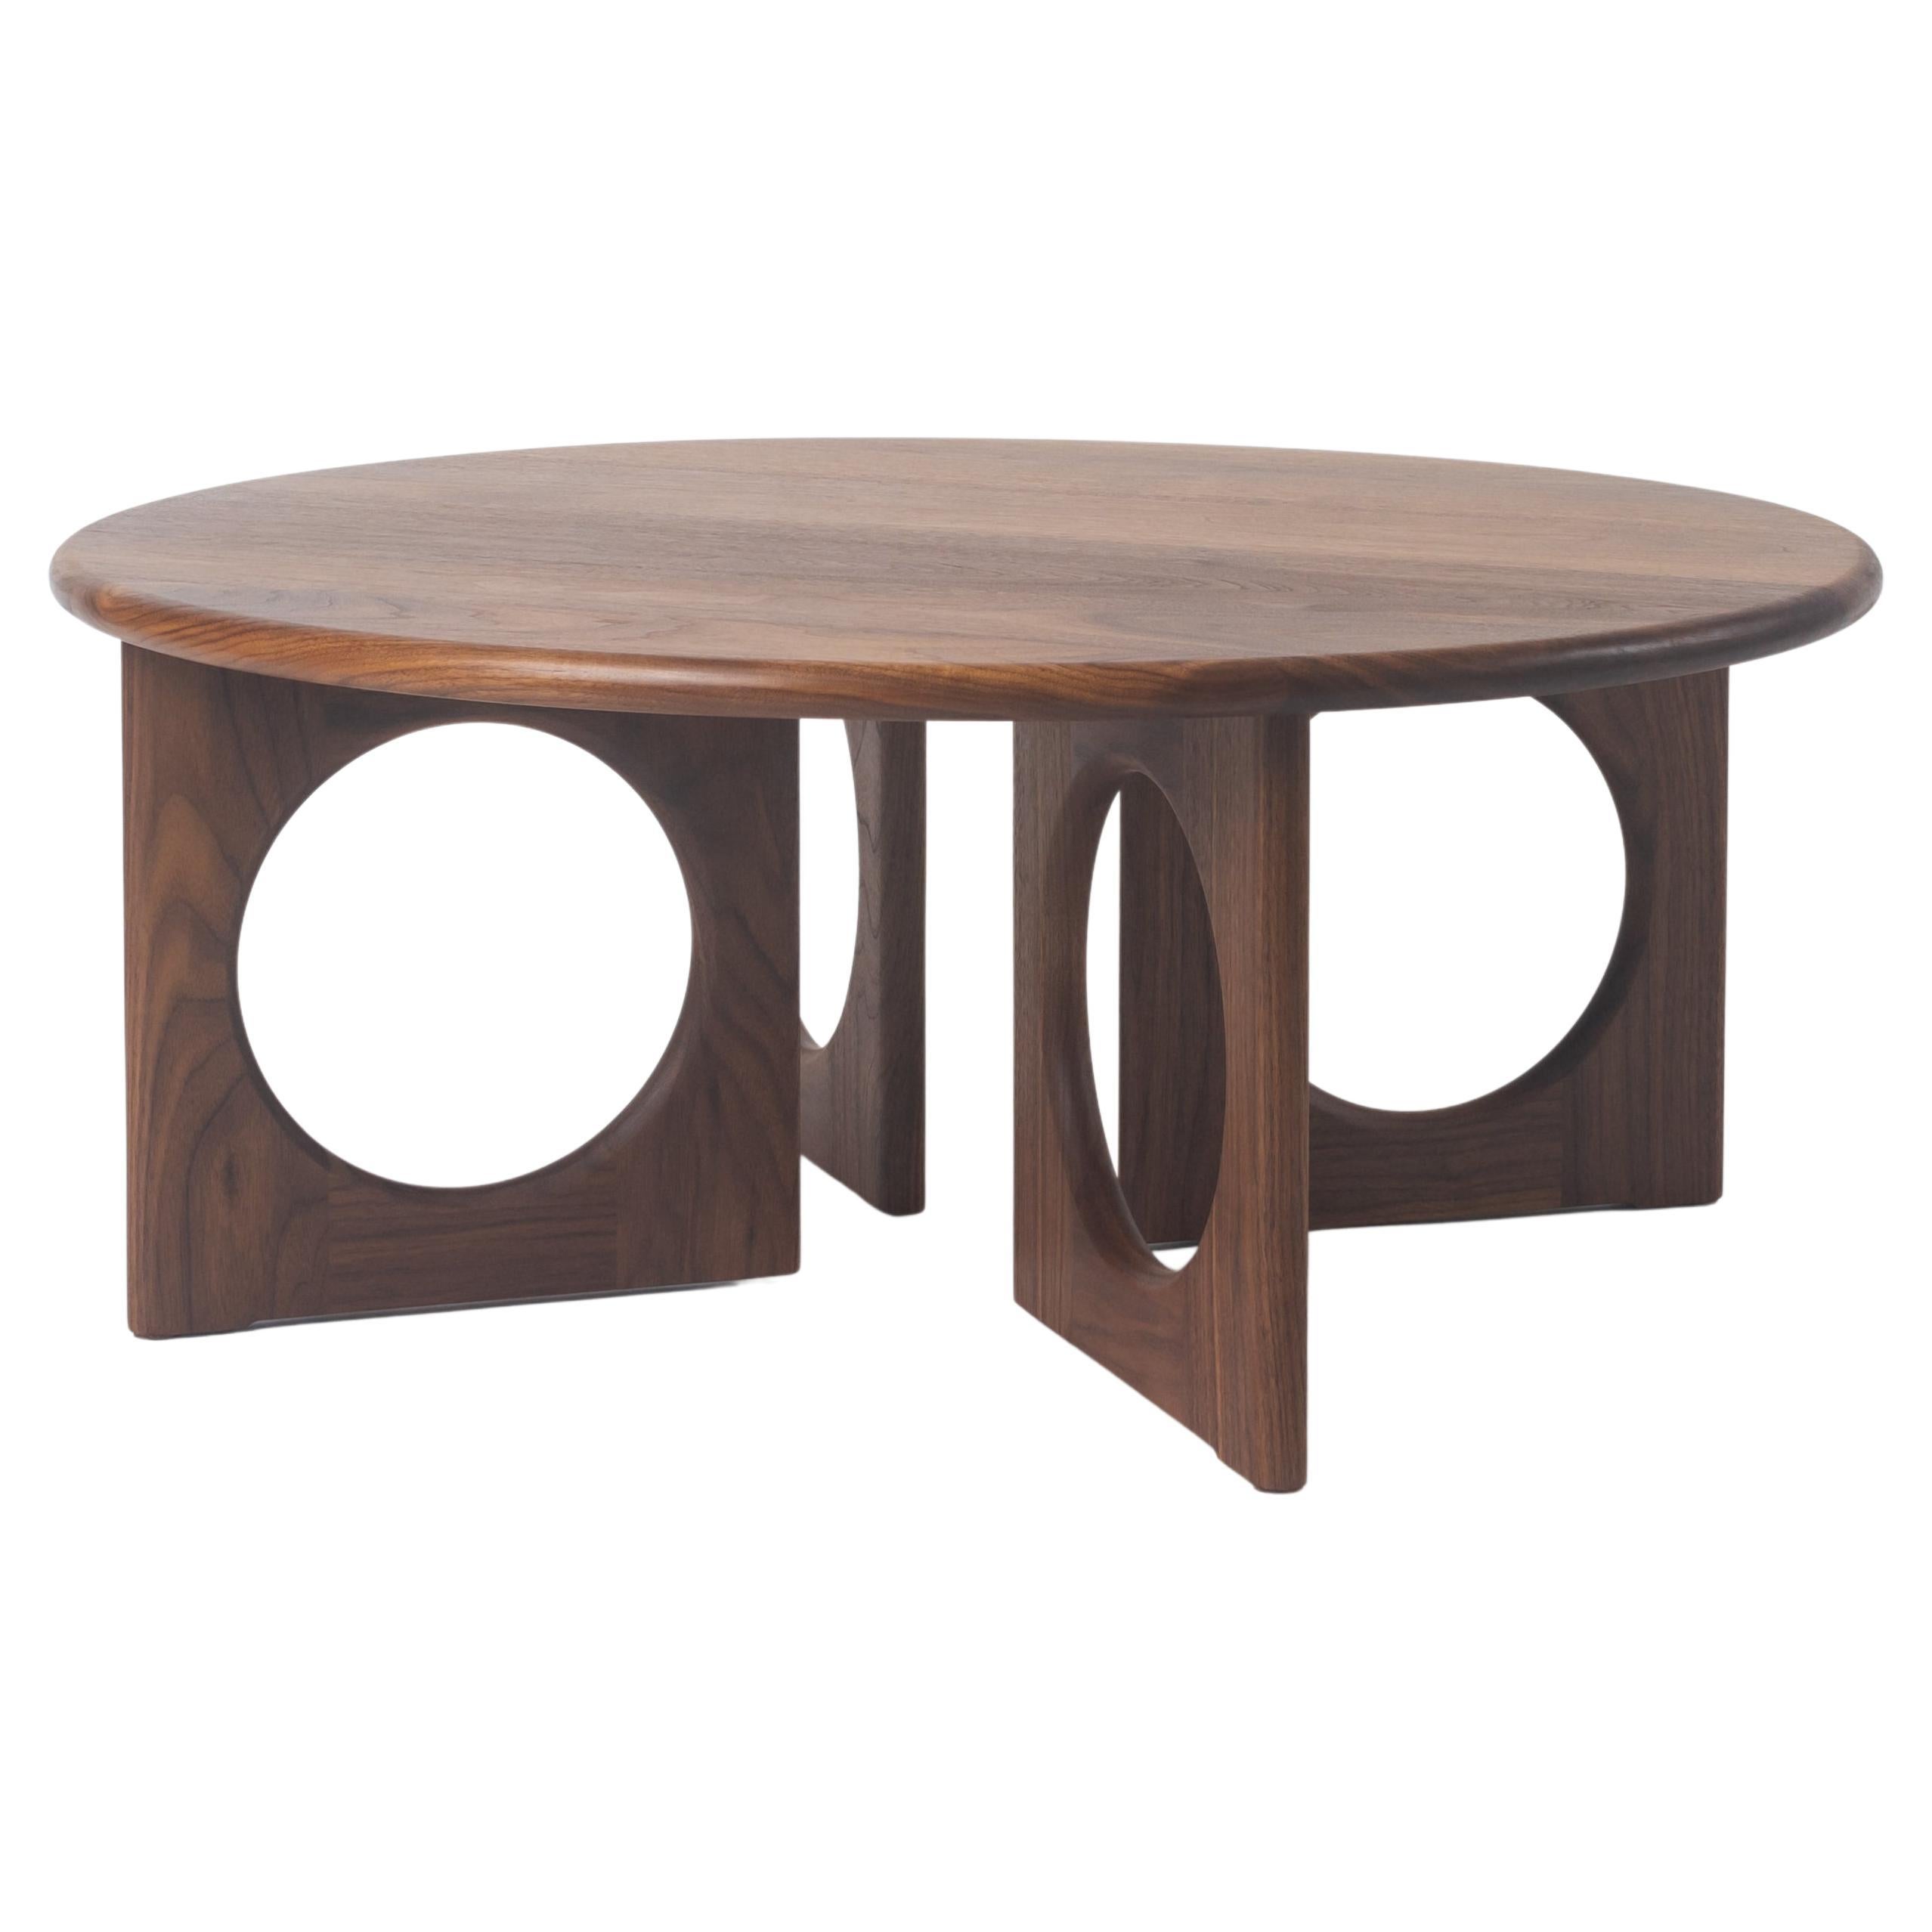 Porthole Low Table, Handcrafted Massivholz Couchtisch im Angebot